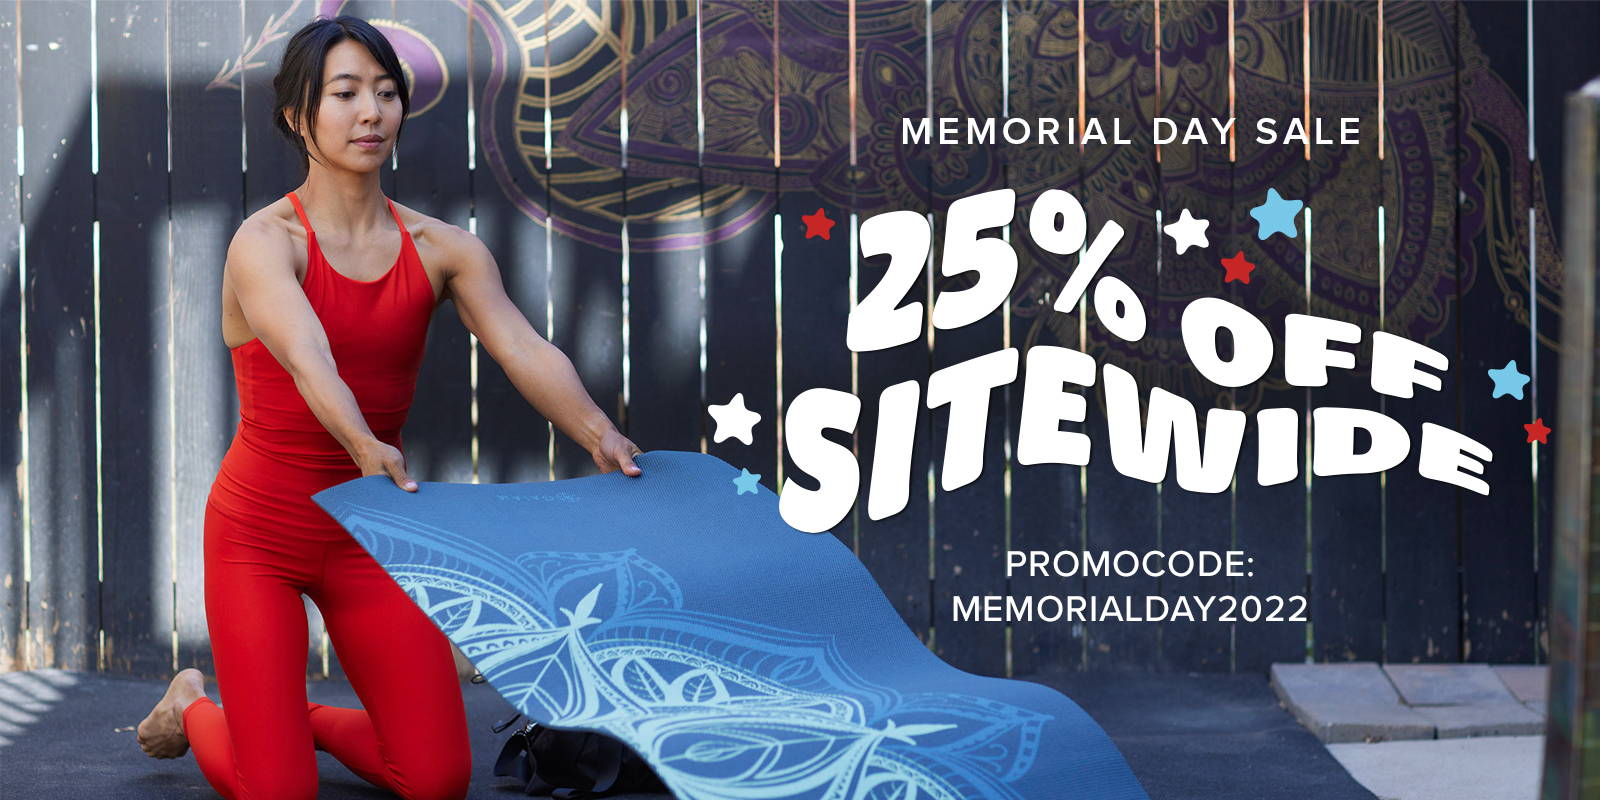 25% Off Sitewide